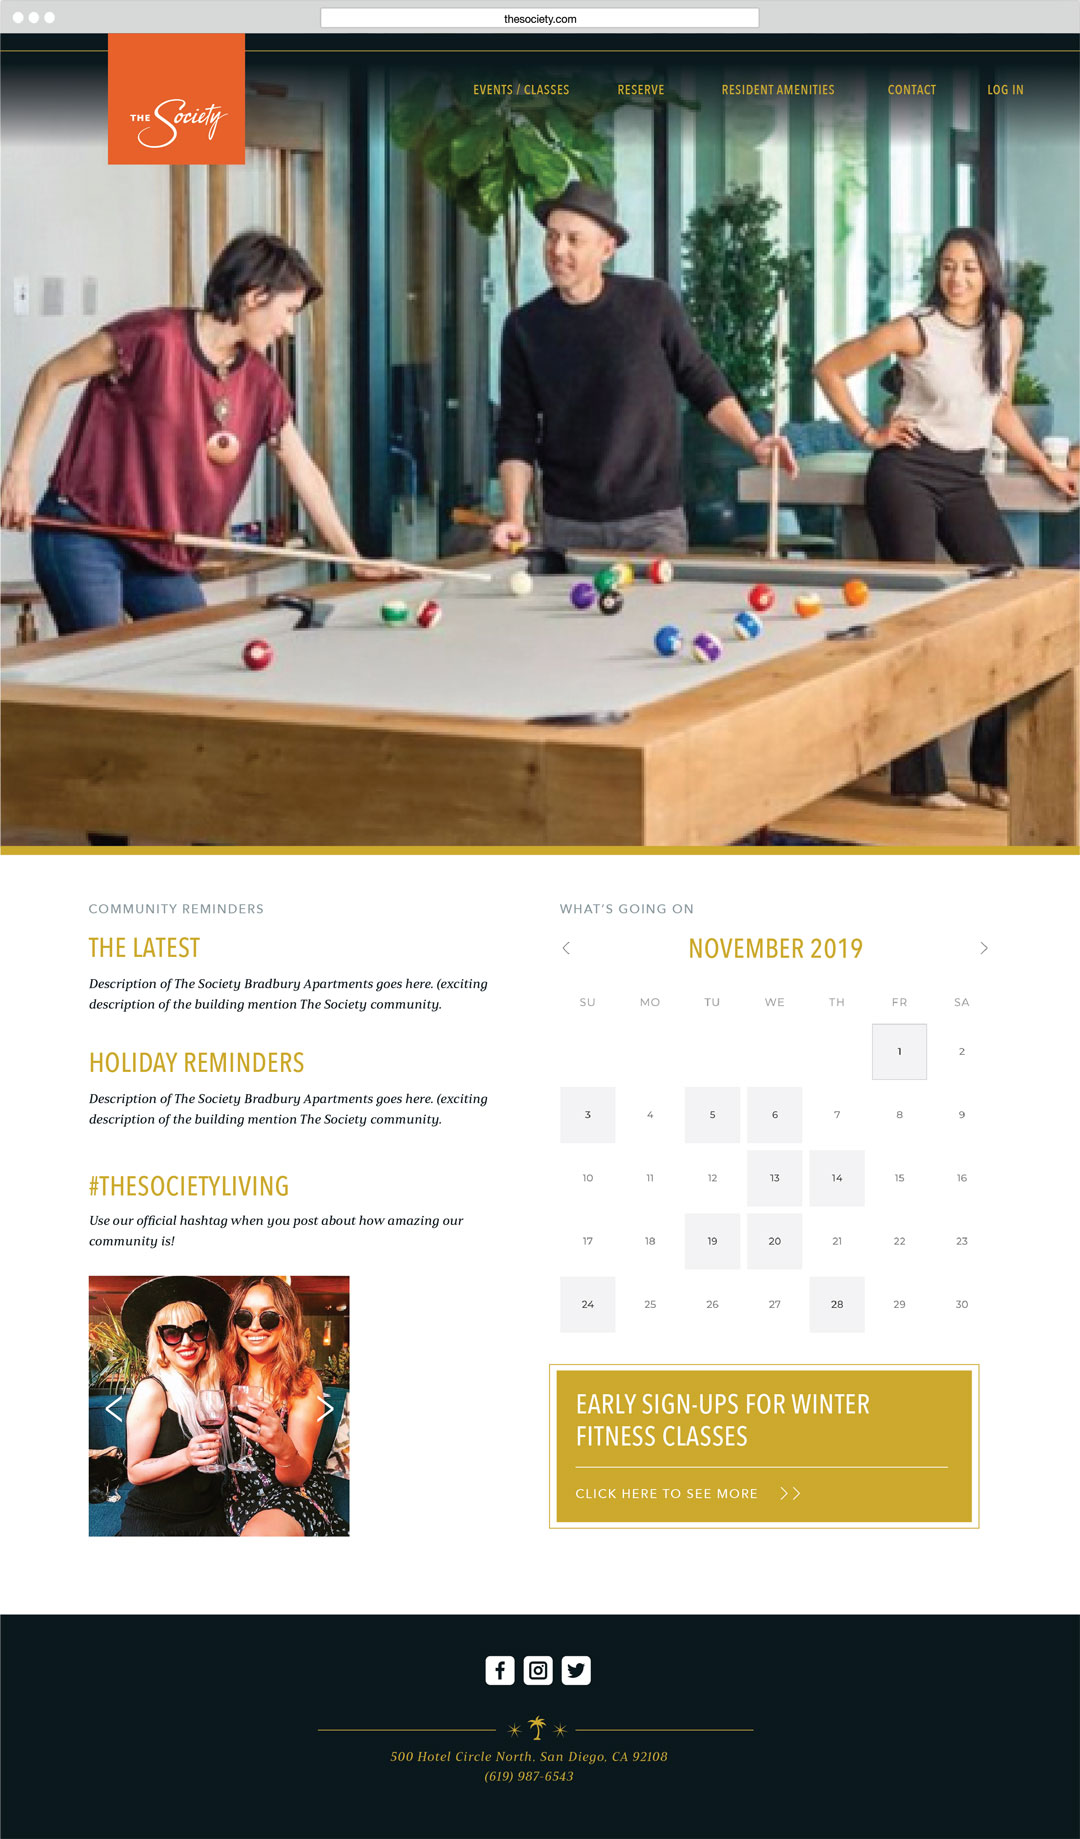 Mockup of The Society Luxury Apartments resident webpage created by Incubate Design